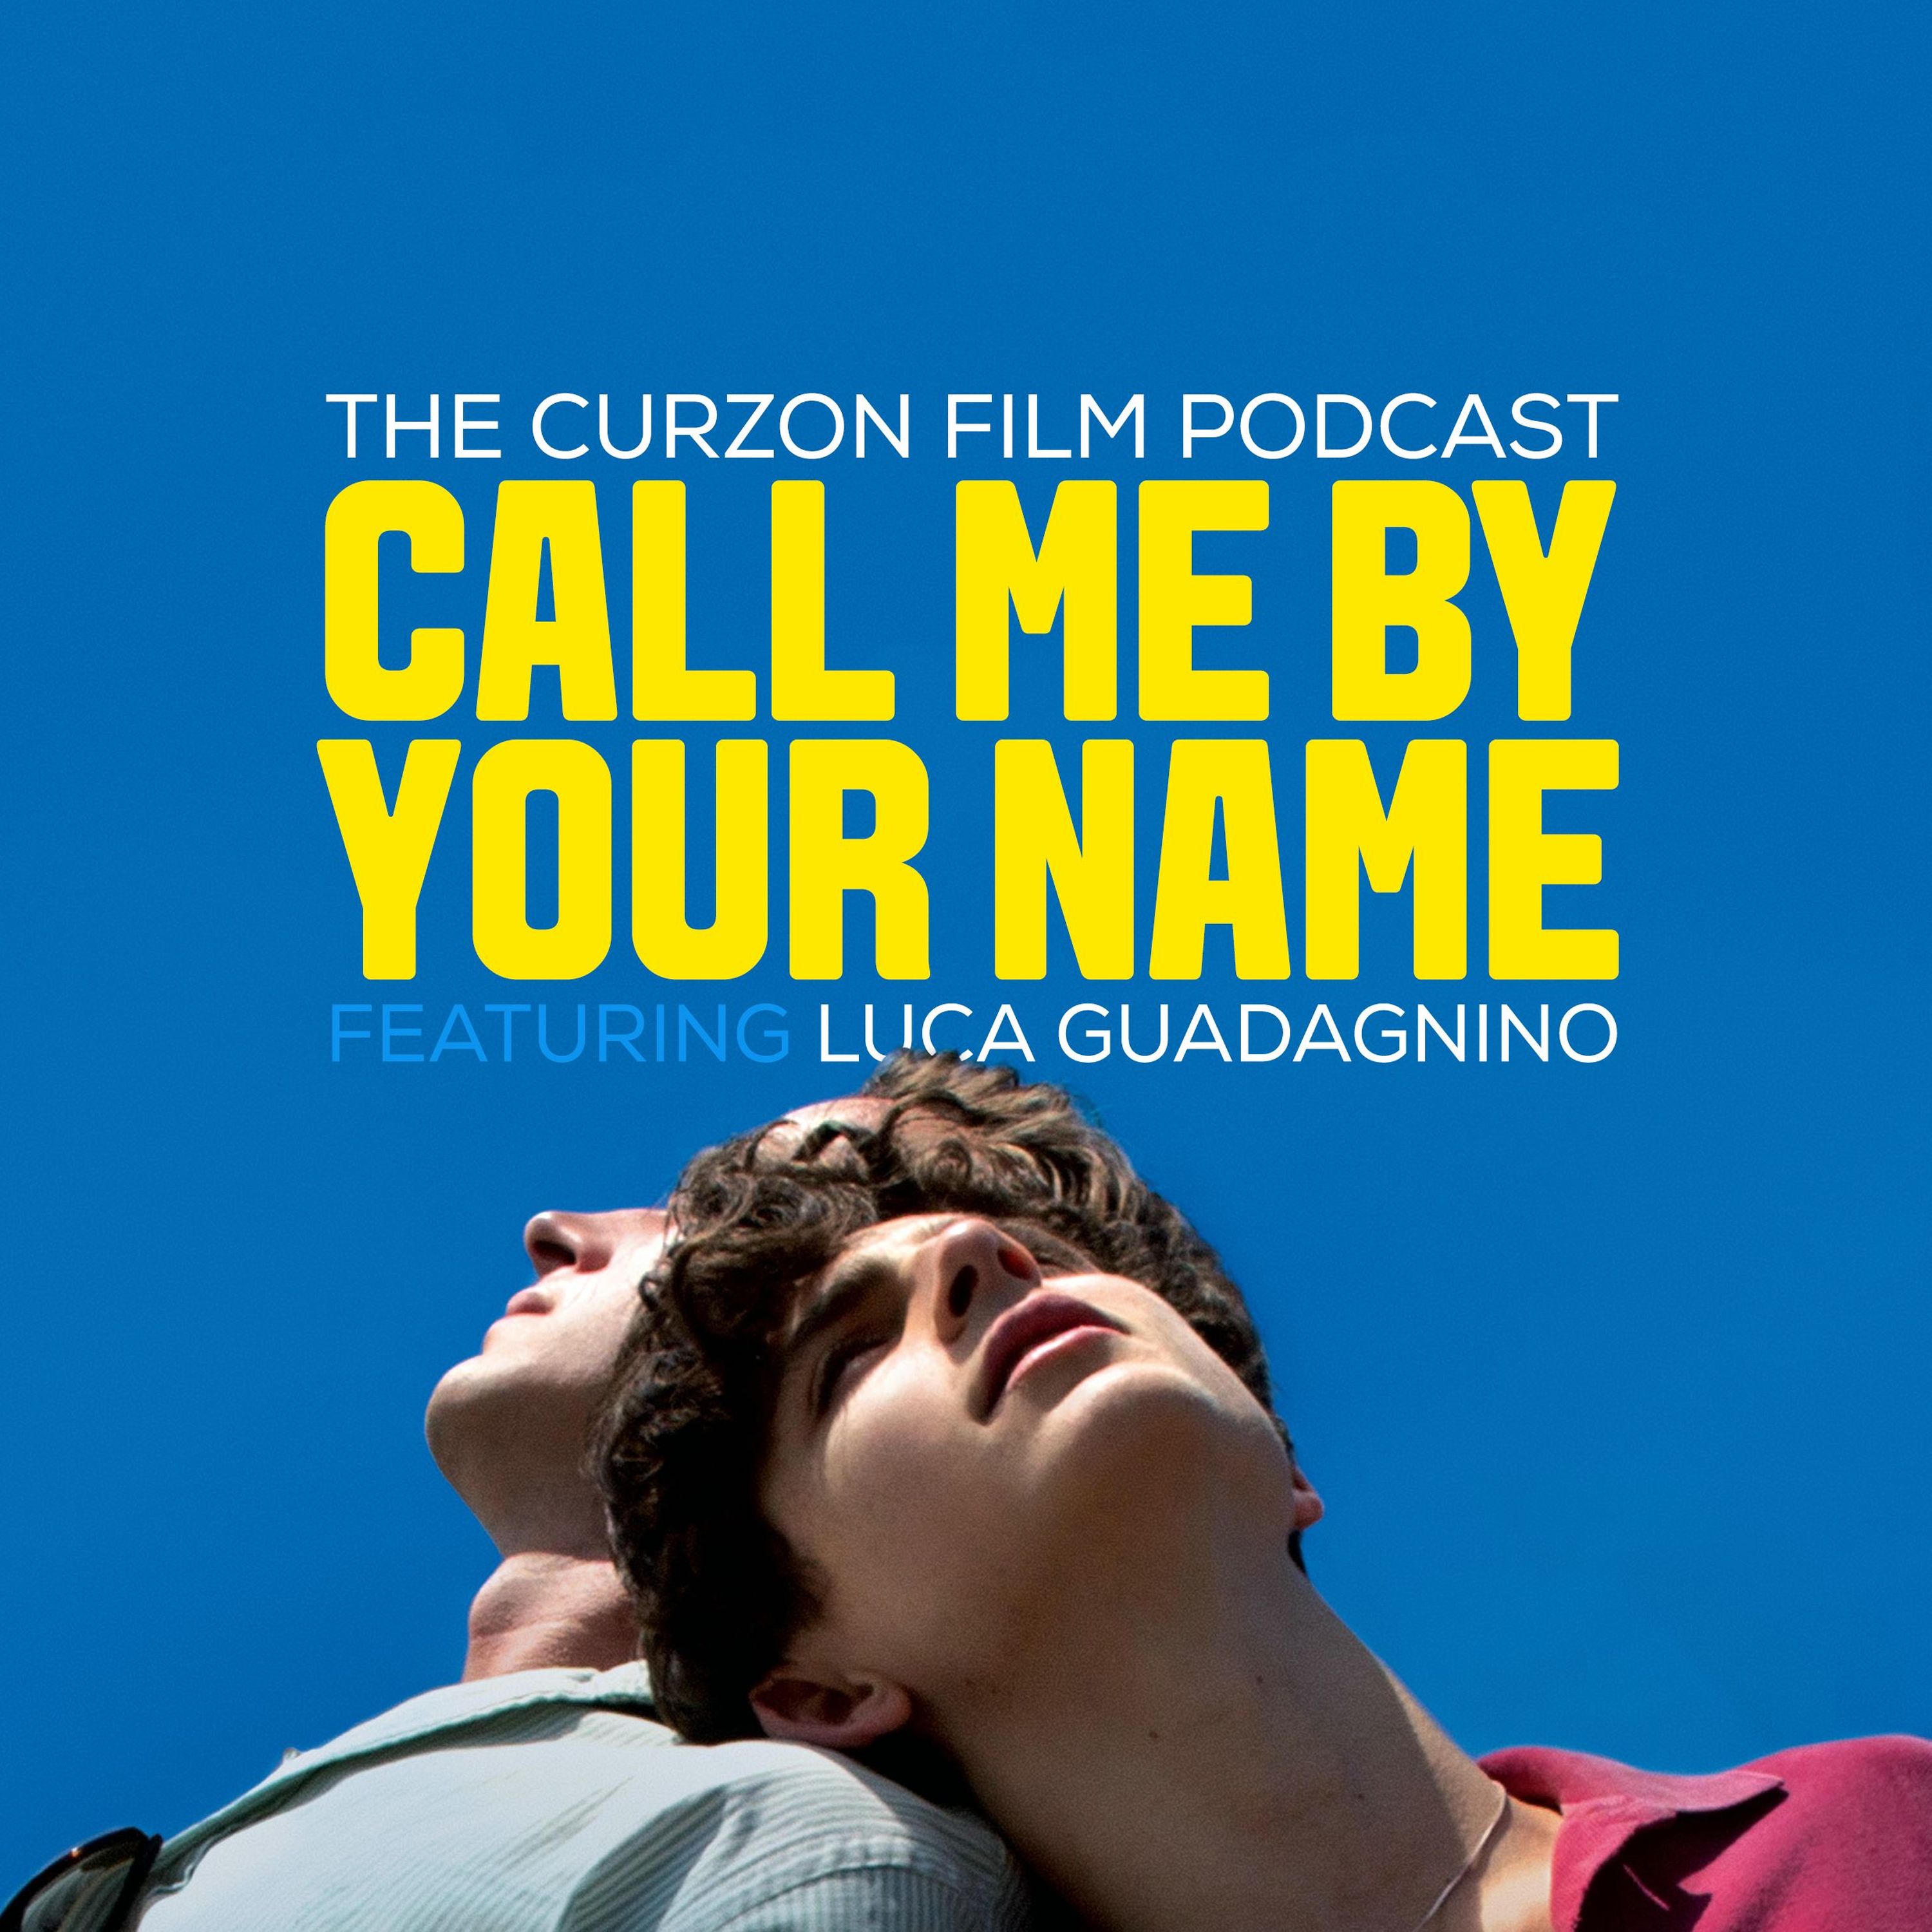 Call Me By Your Name Feat Luca Guadagnino 92 The Curzon Film Podcast On Acast